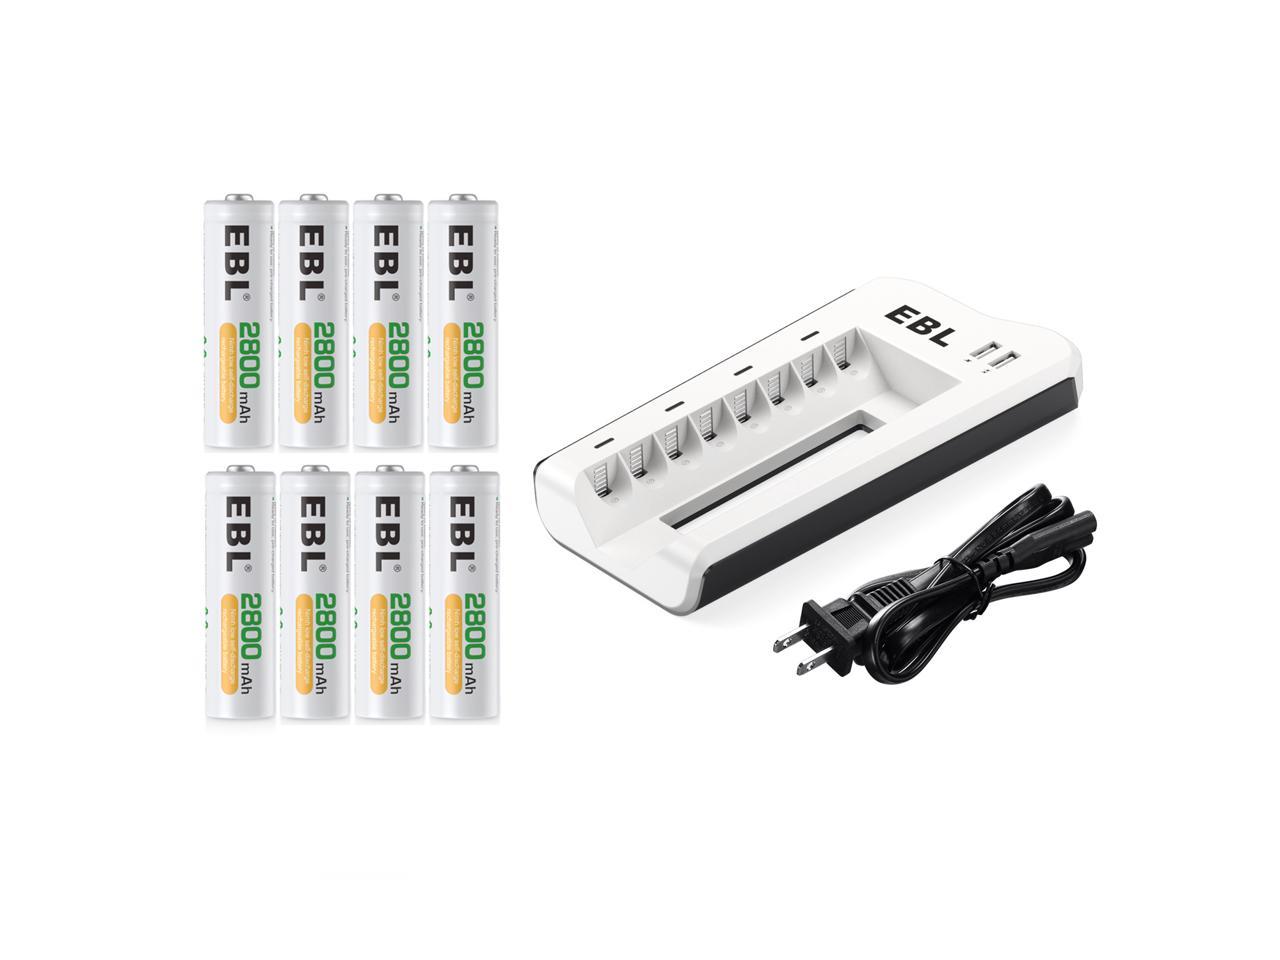 EBL LCD Individual AA AAA Battery Charger Power by USB & Type C with 8 AA 2800mAh Rechargeable Batteries 